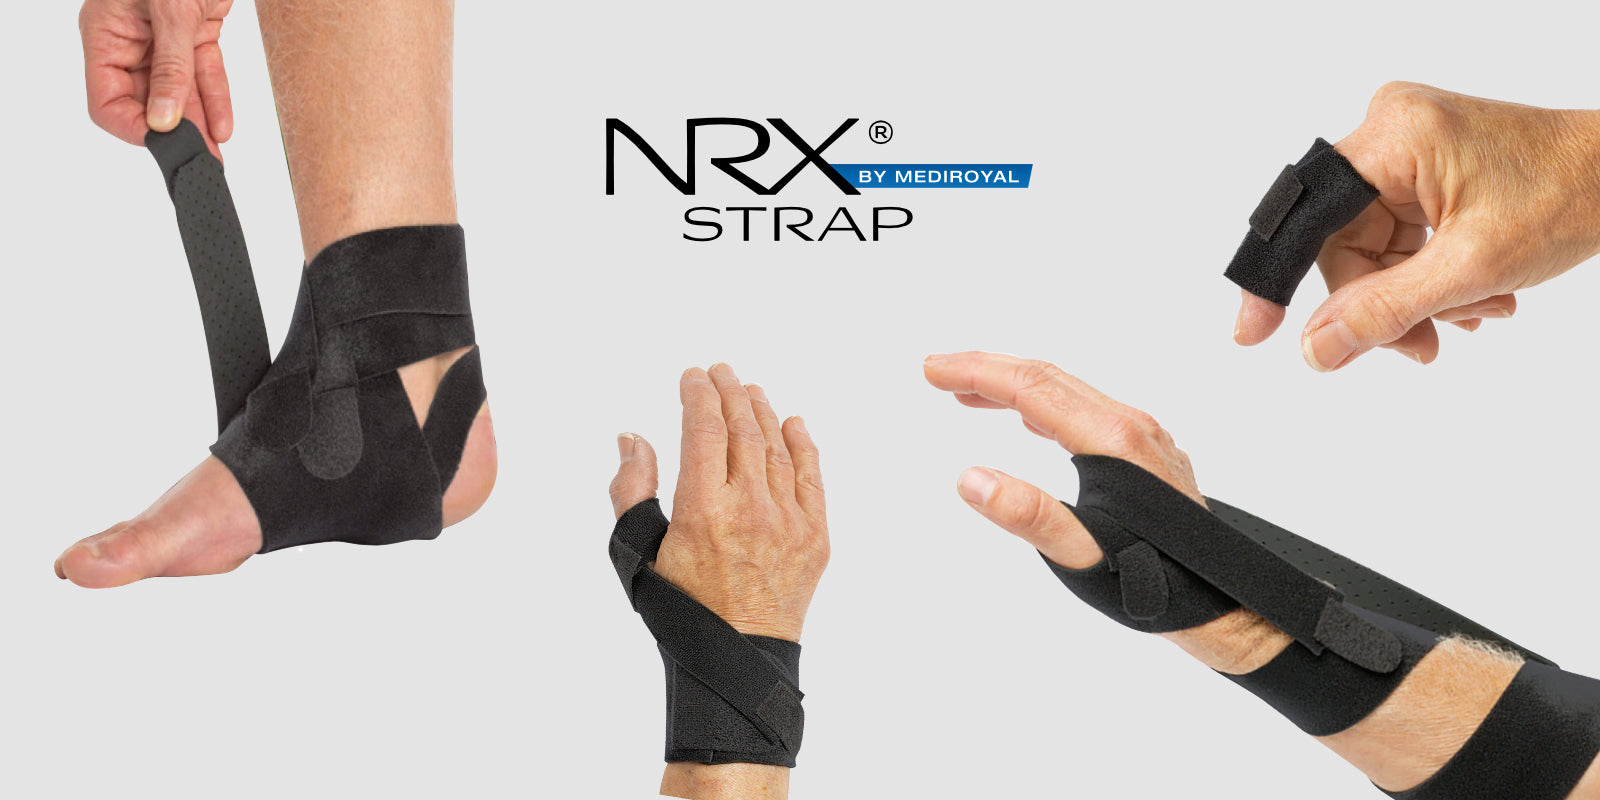 NRX Strapping - An innovative design